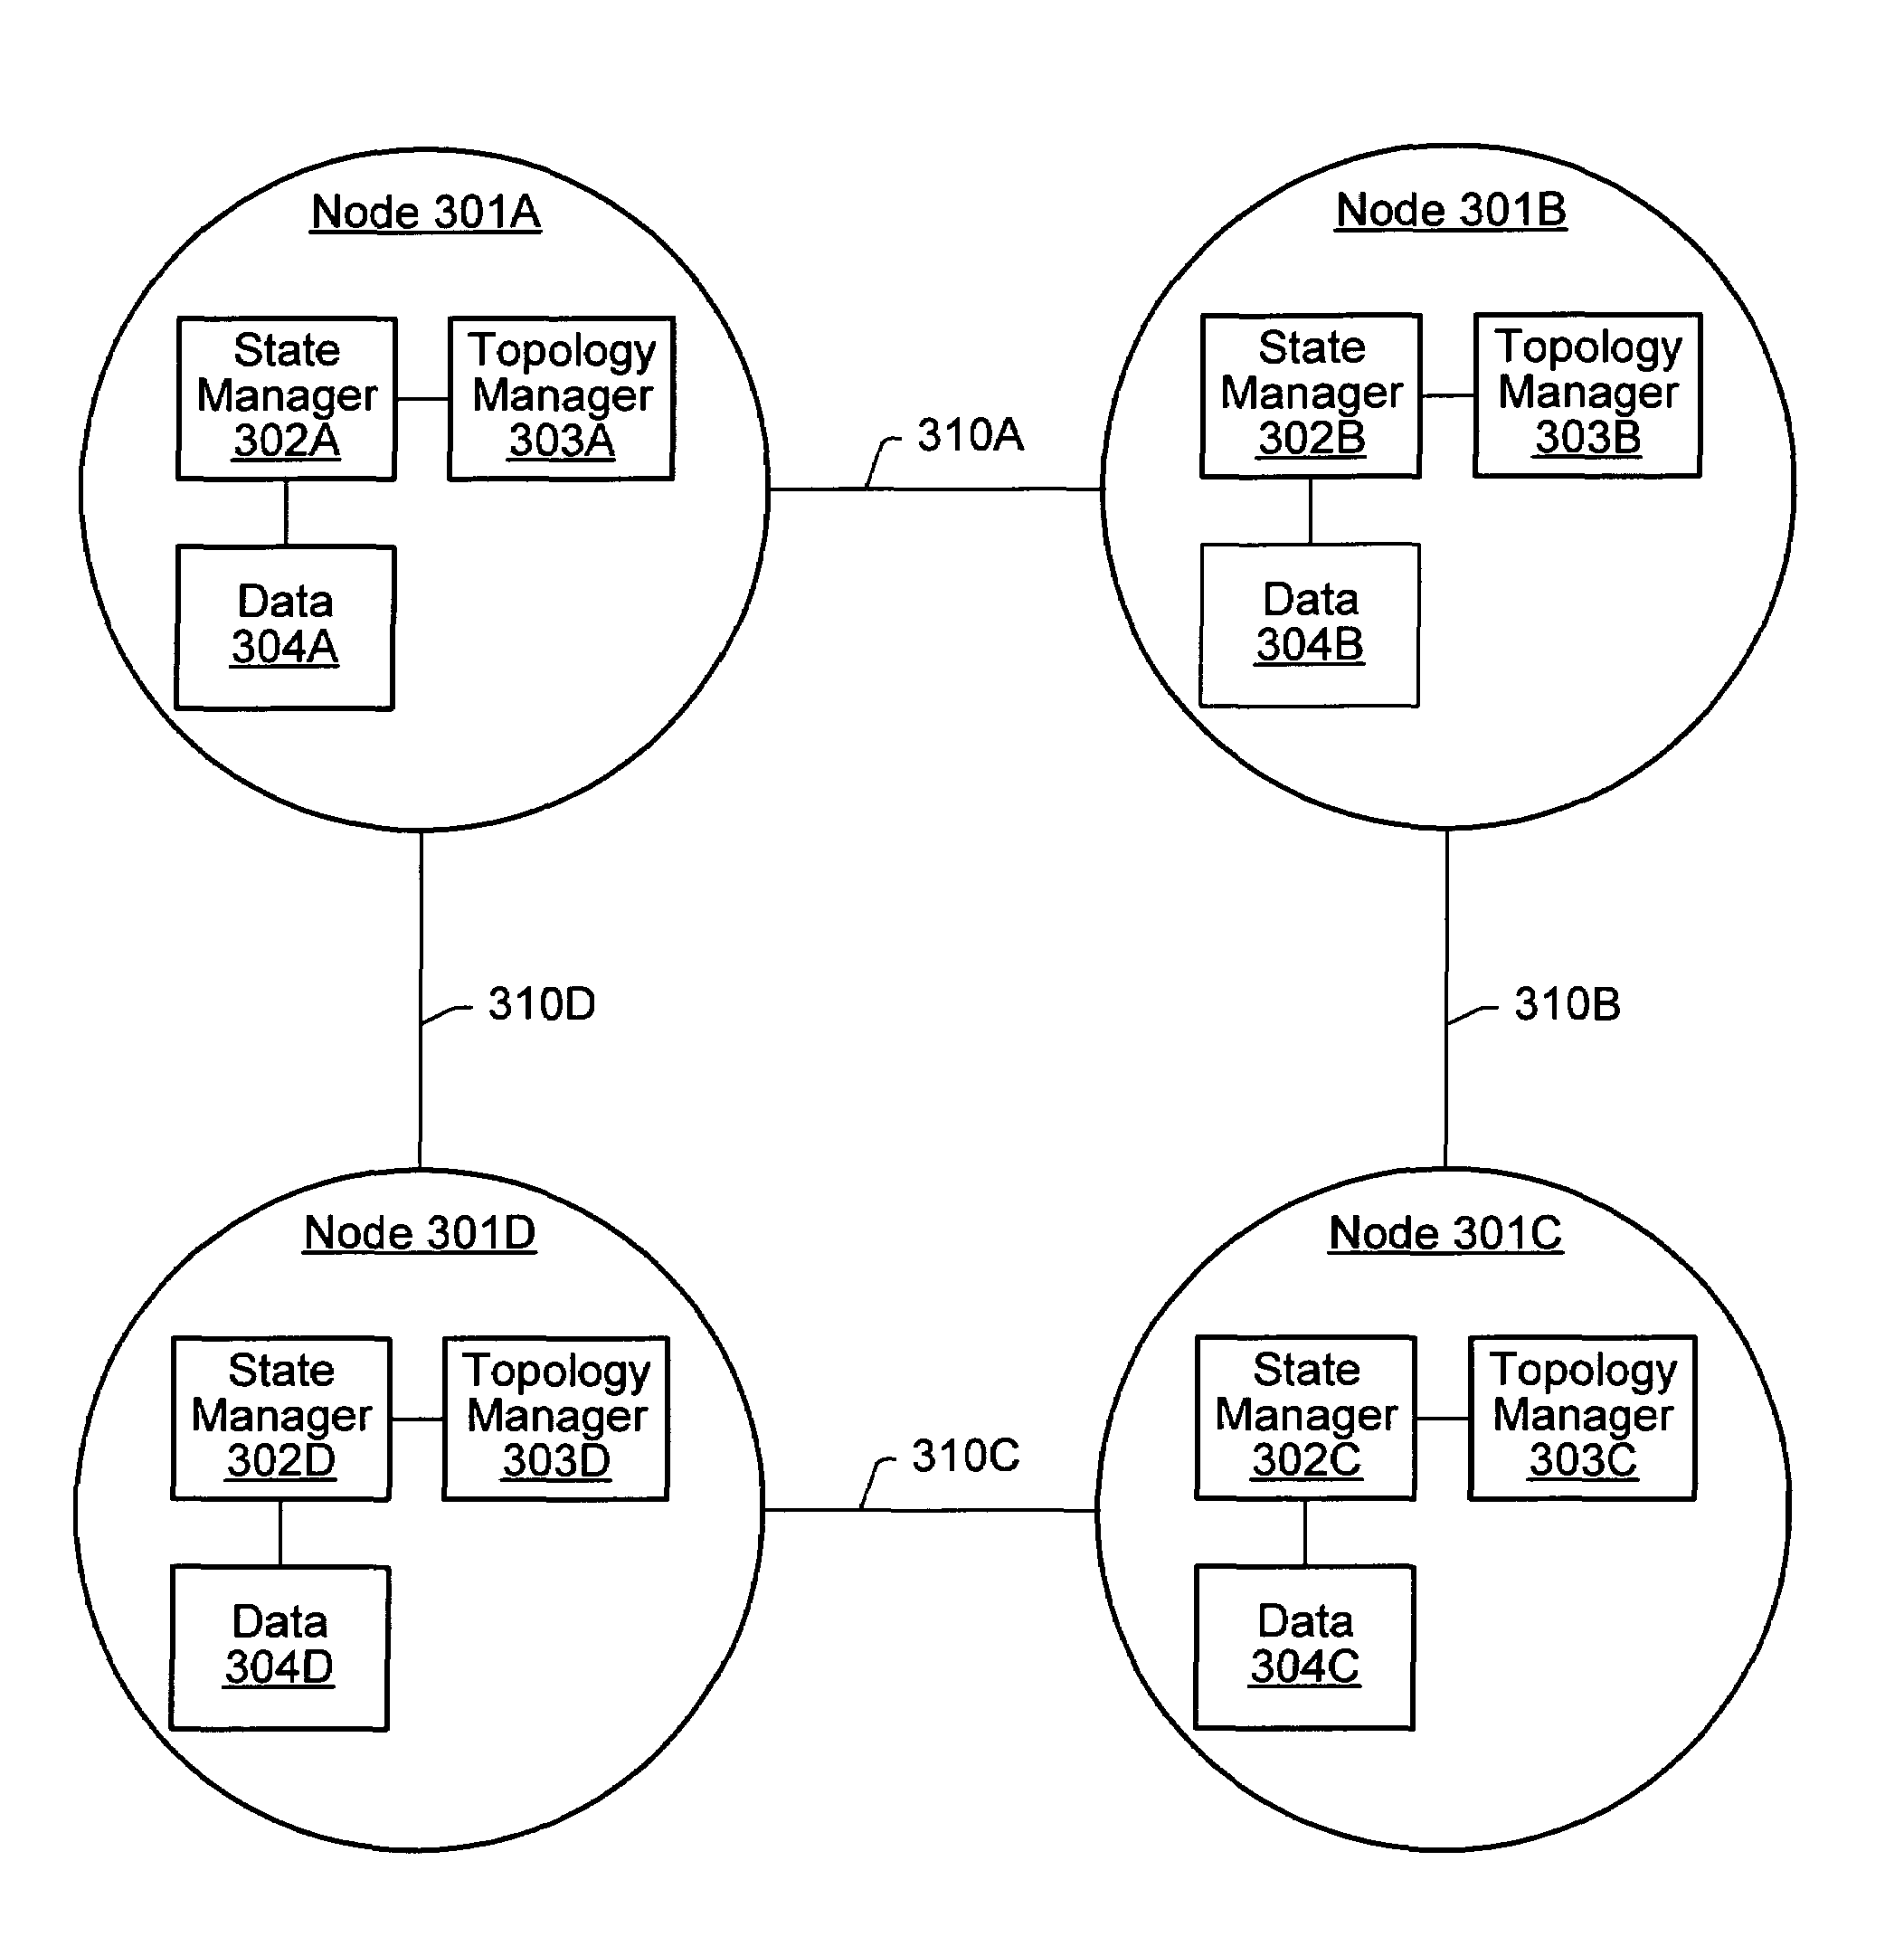 System and method for dynamic cluster adjustment to node failures in a distributed data system